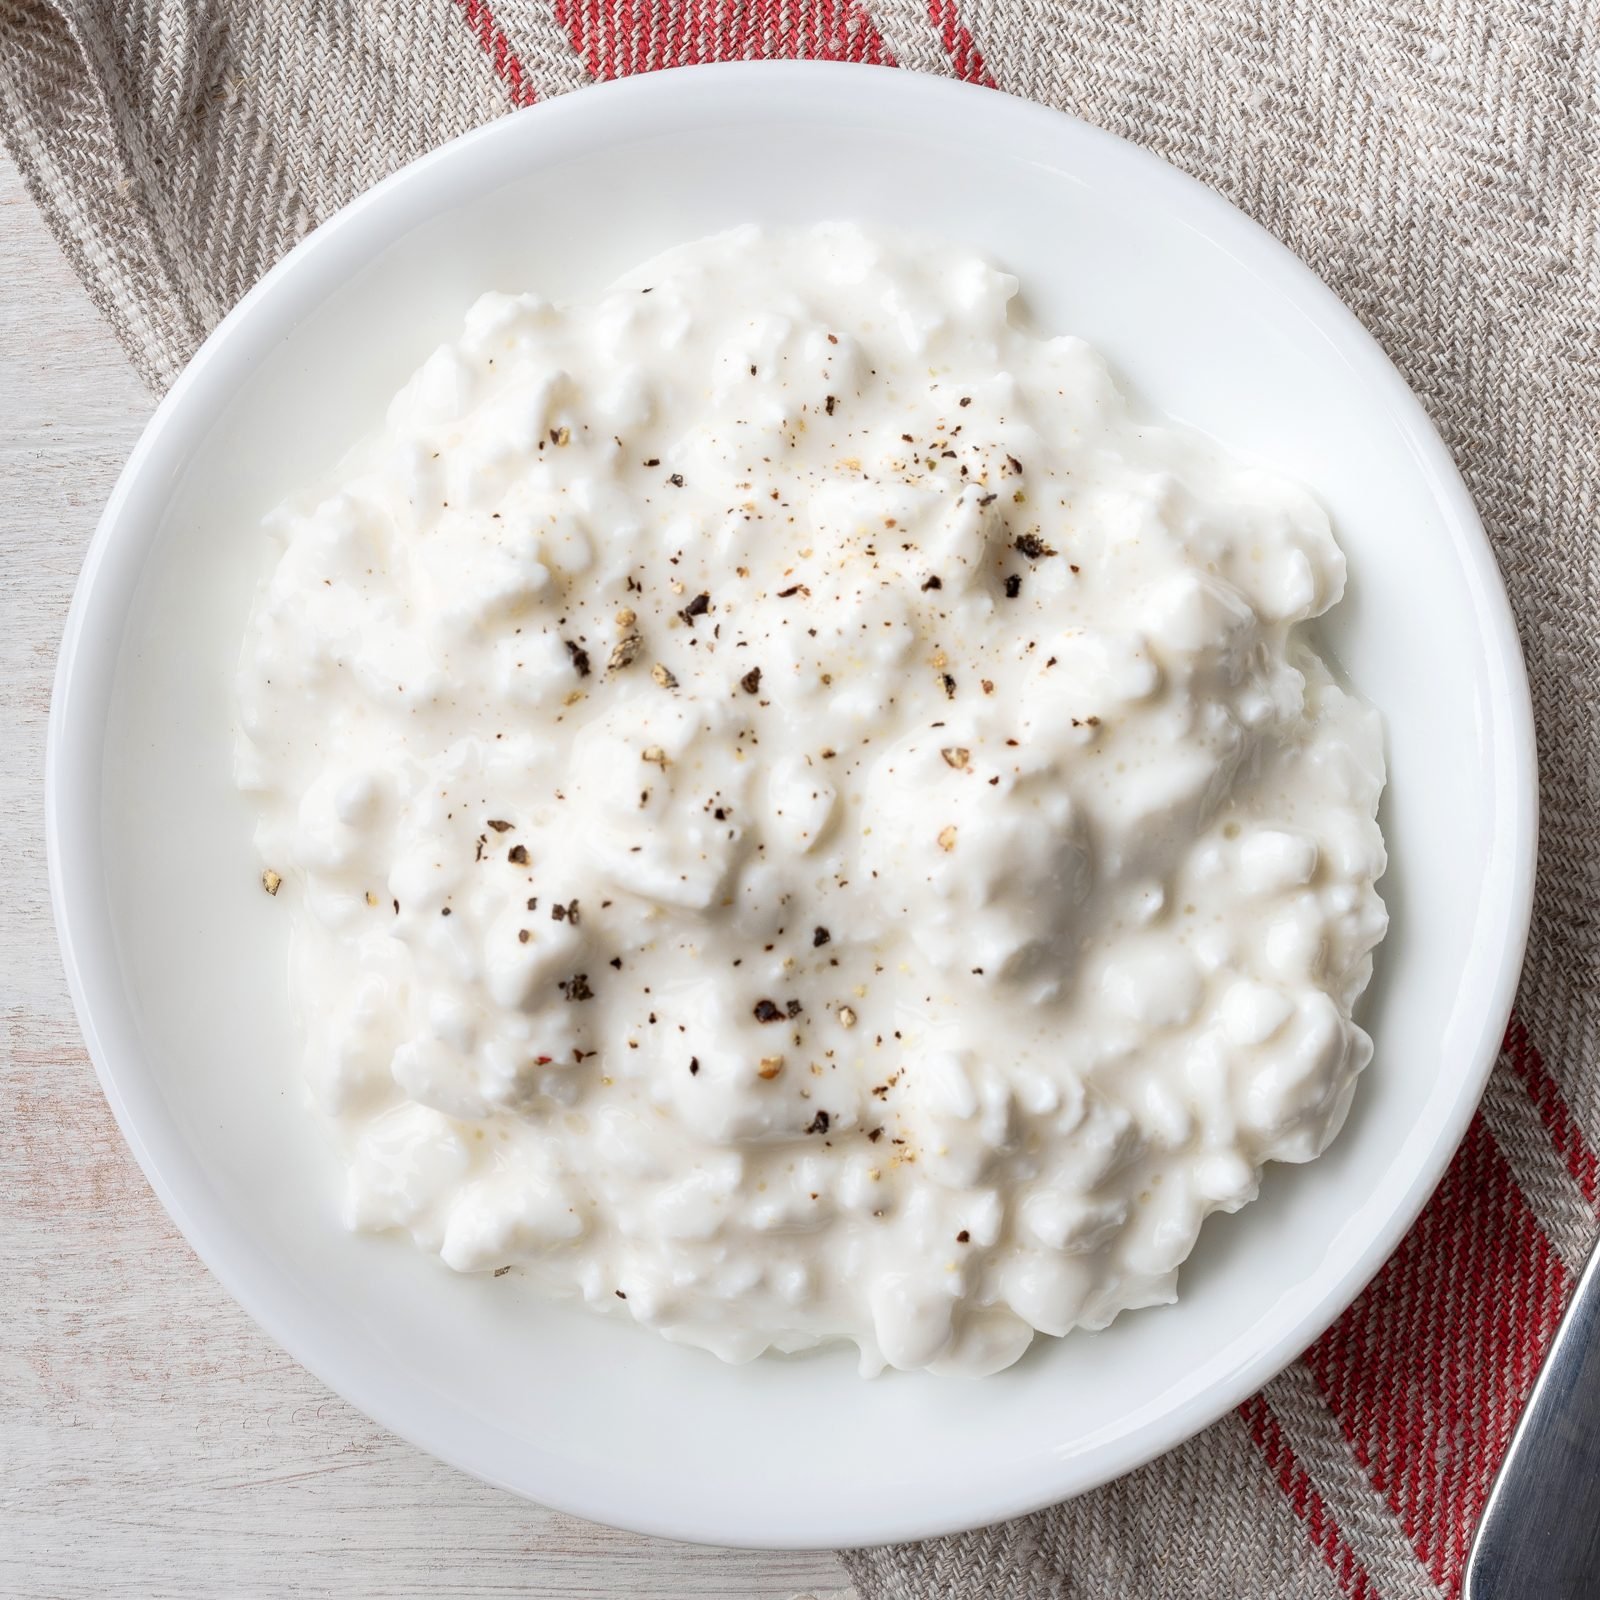 Is it okay to eat cottage cheese everyday?